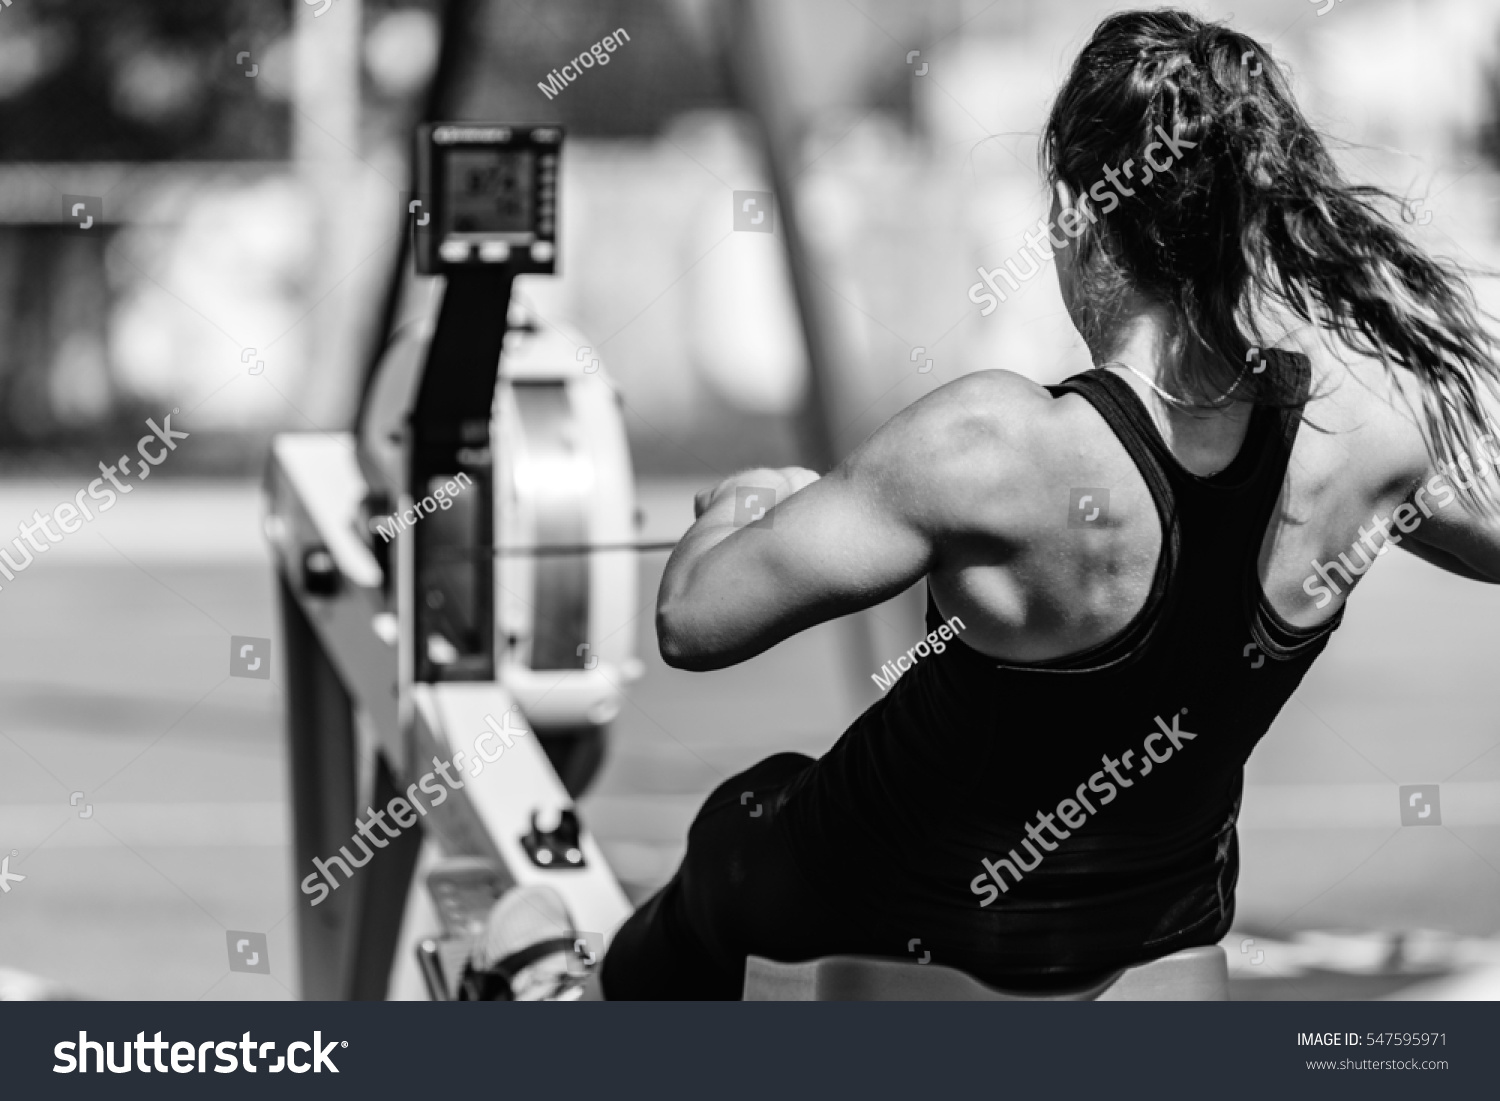 Female athlete on rowing machine on cross competition. #547595971